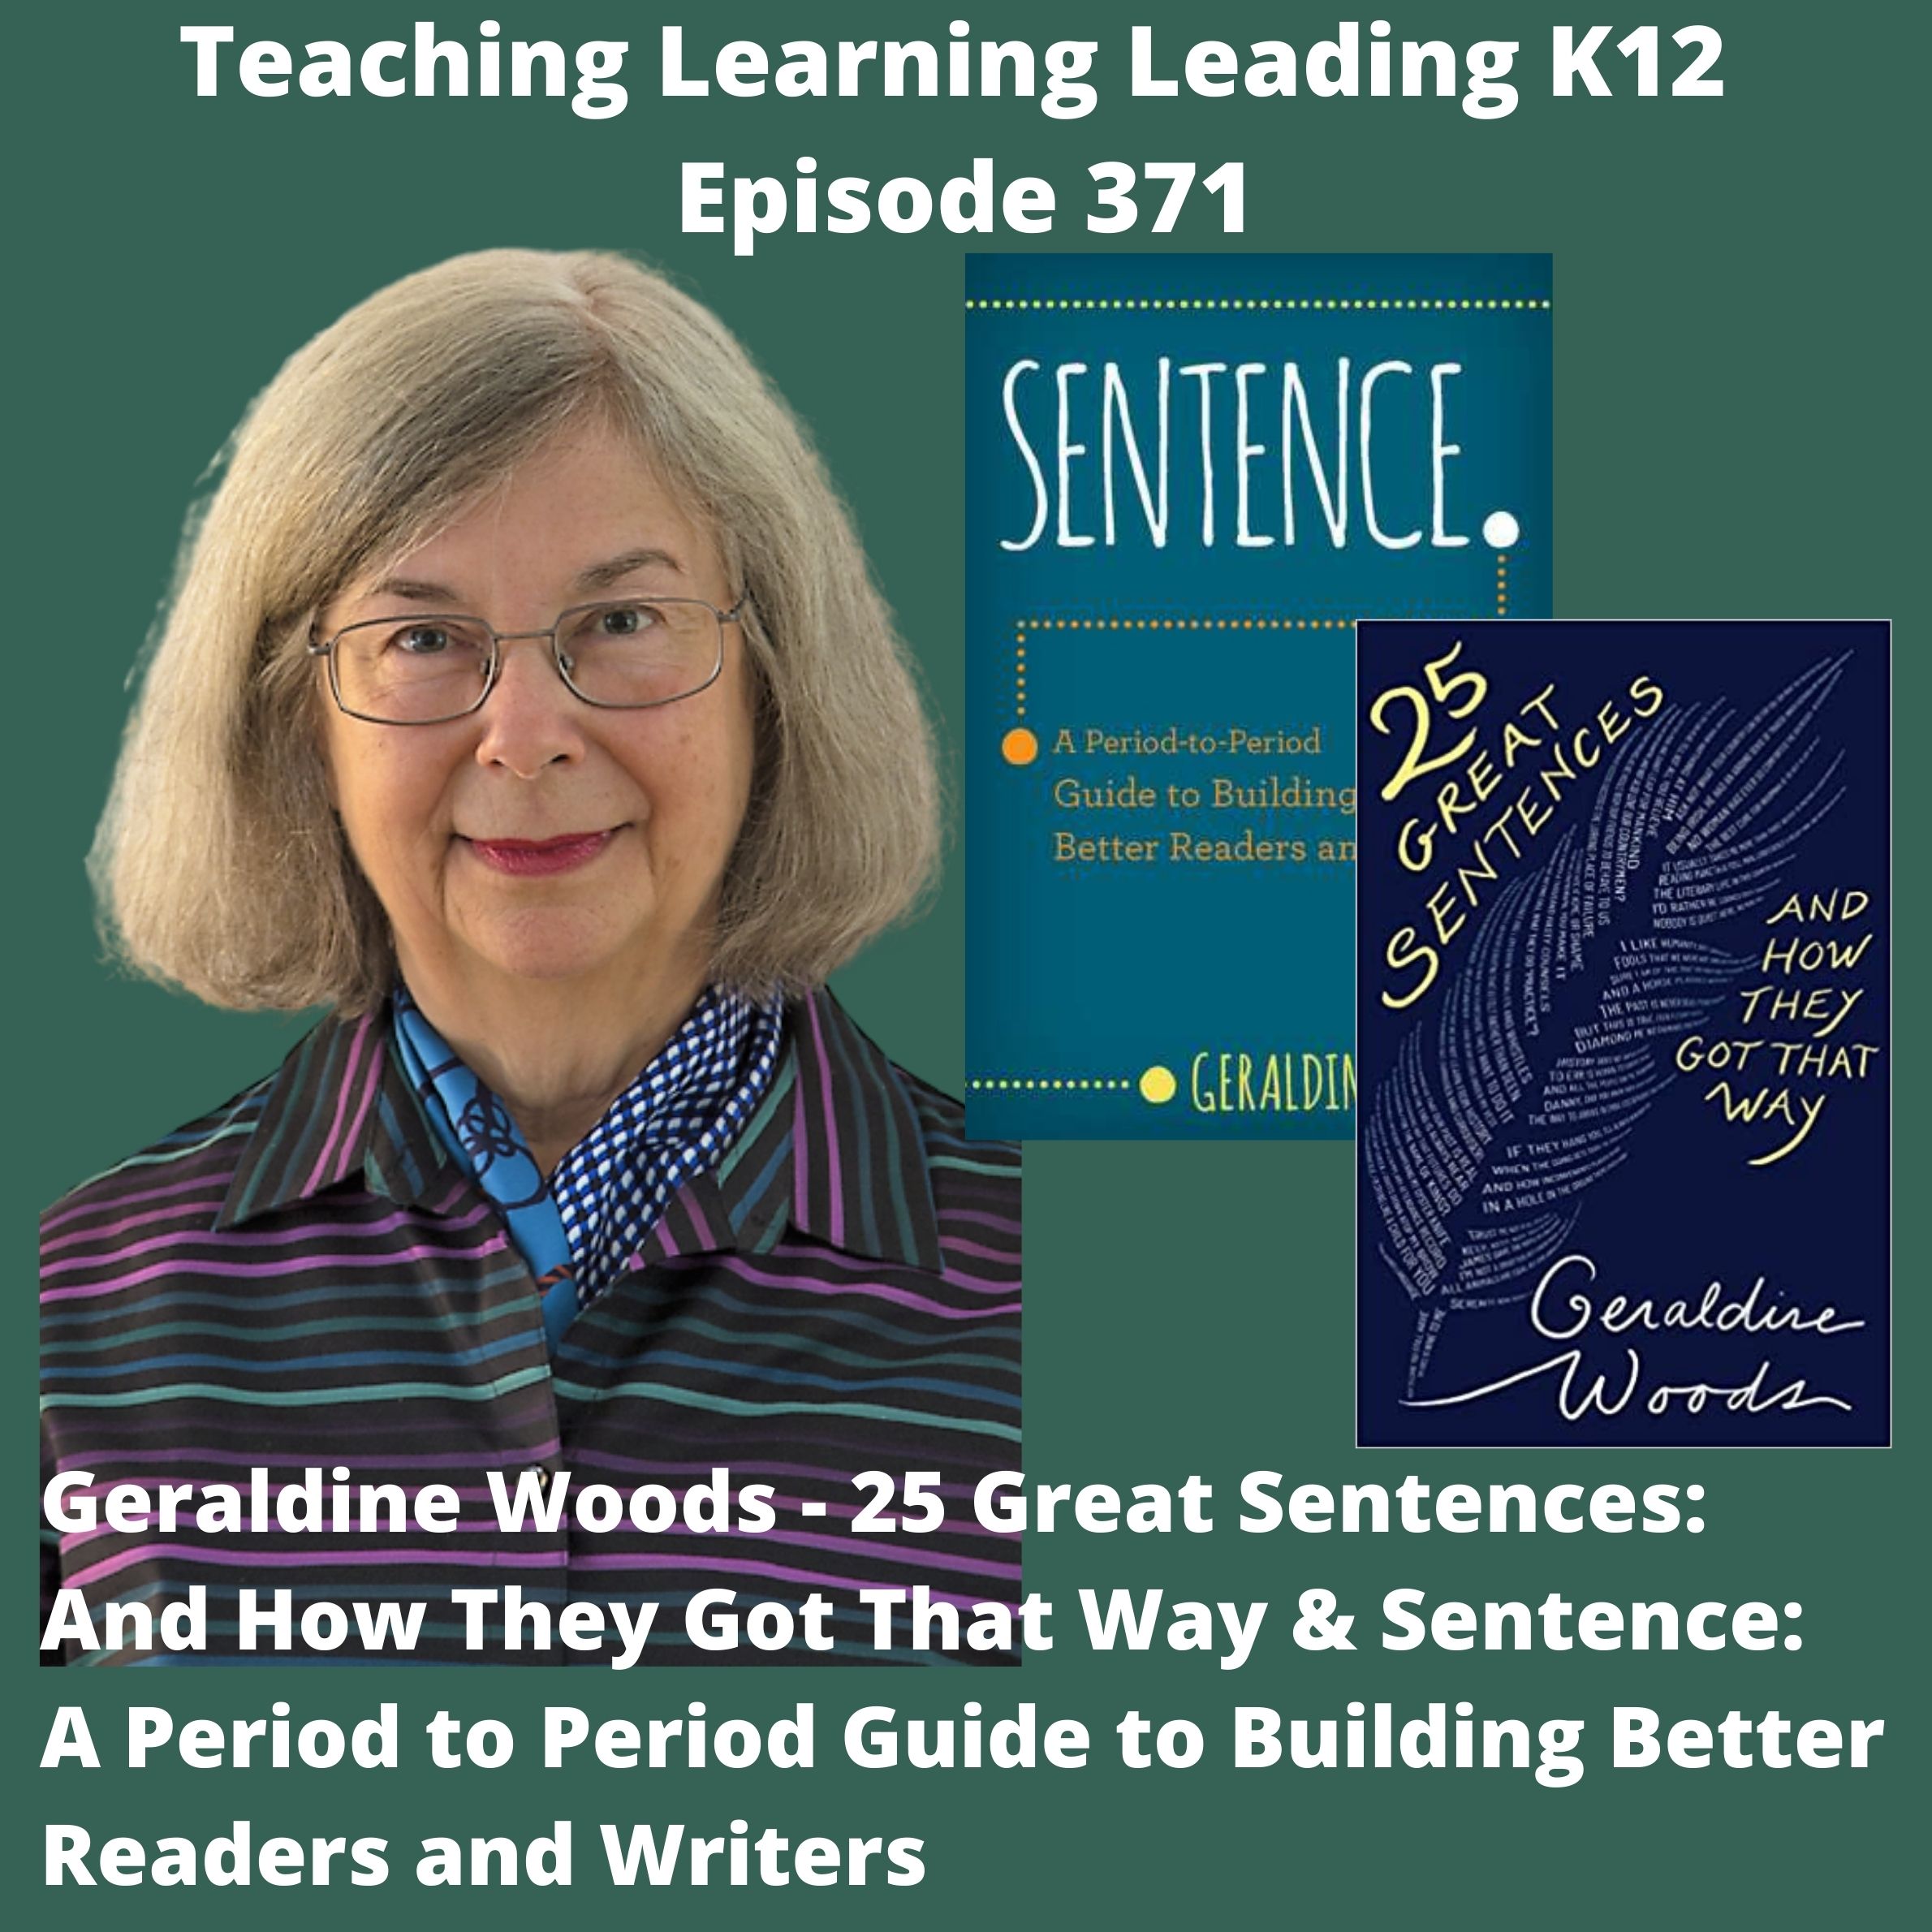 Geraldine Woods - 25 Great Sentences and How They Got That Way & Sentence: A Period to Period Guide to Building Better Readers and Writers - 371 Image